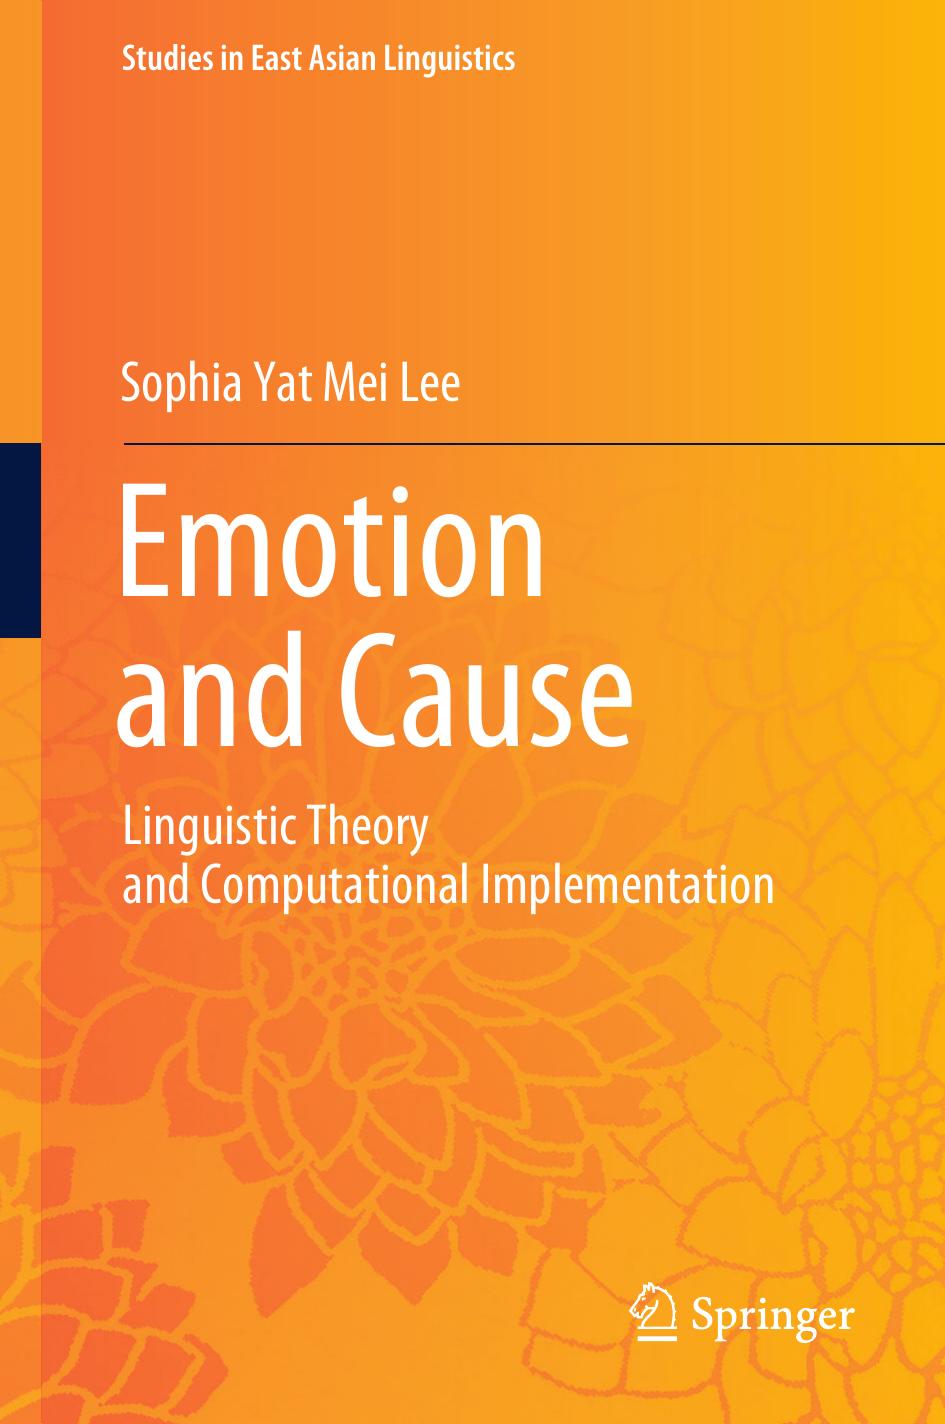 Emotion and Cause: Linguistic Theory and Computational Implementation